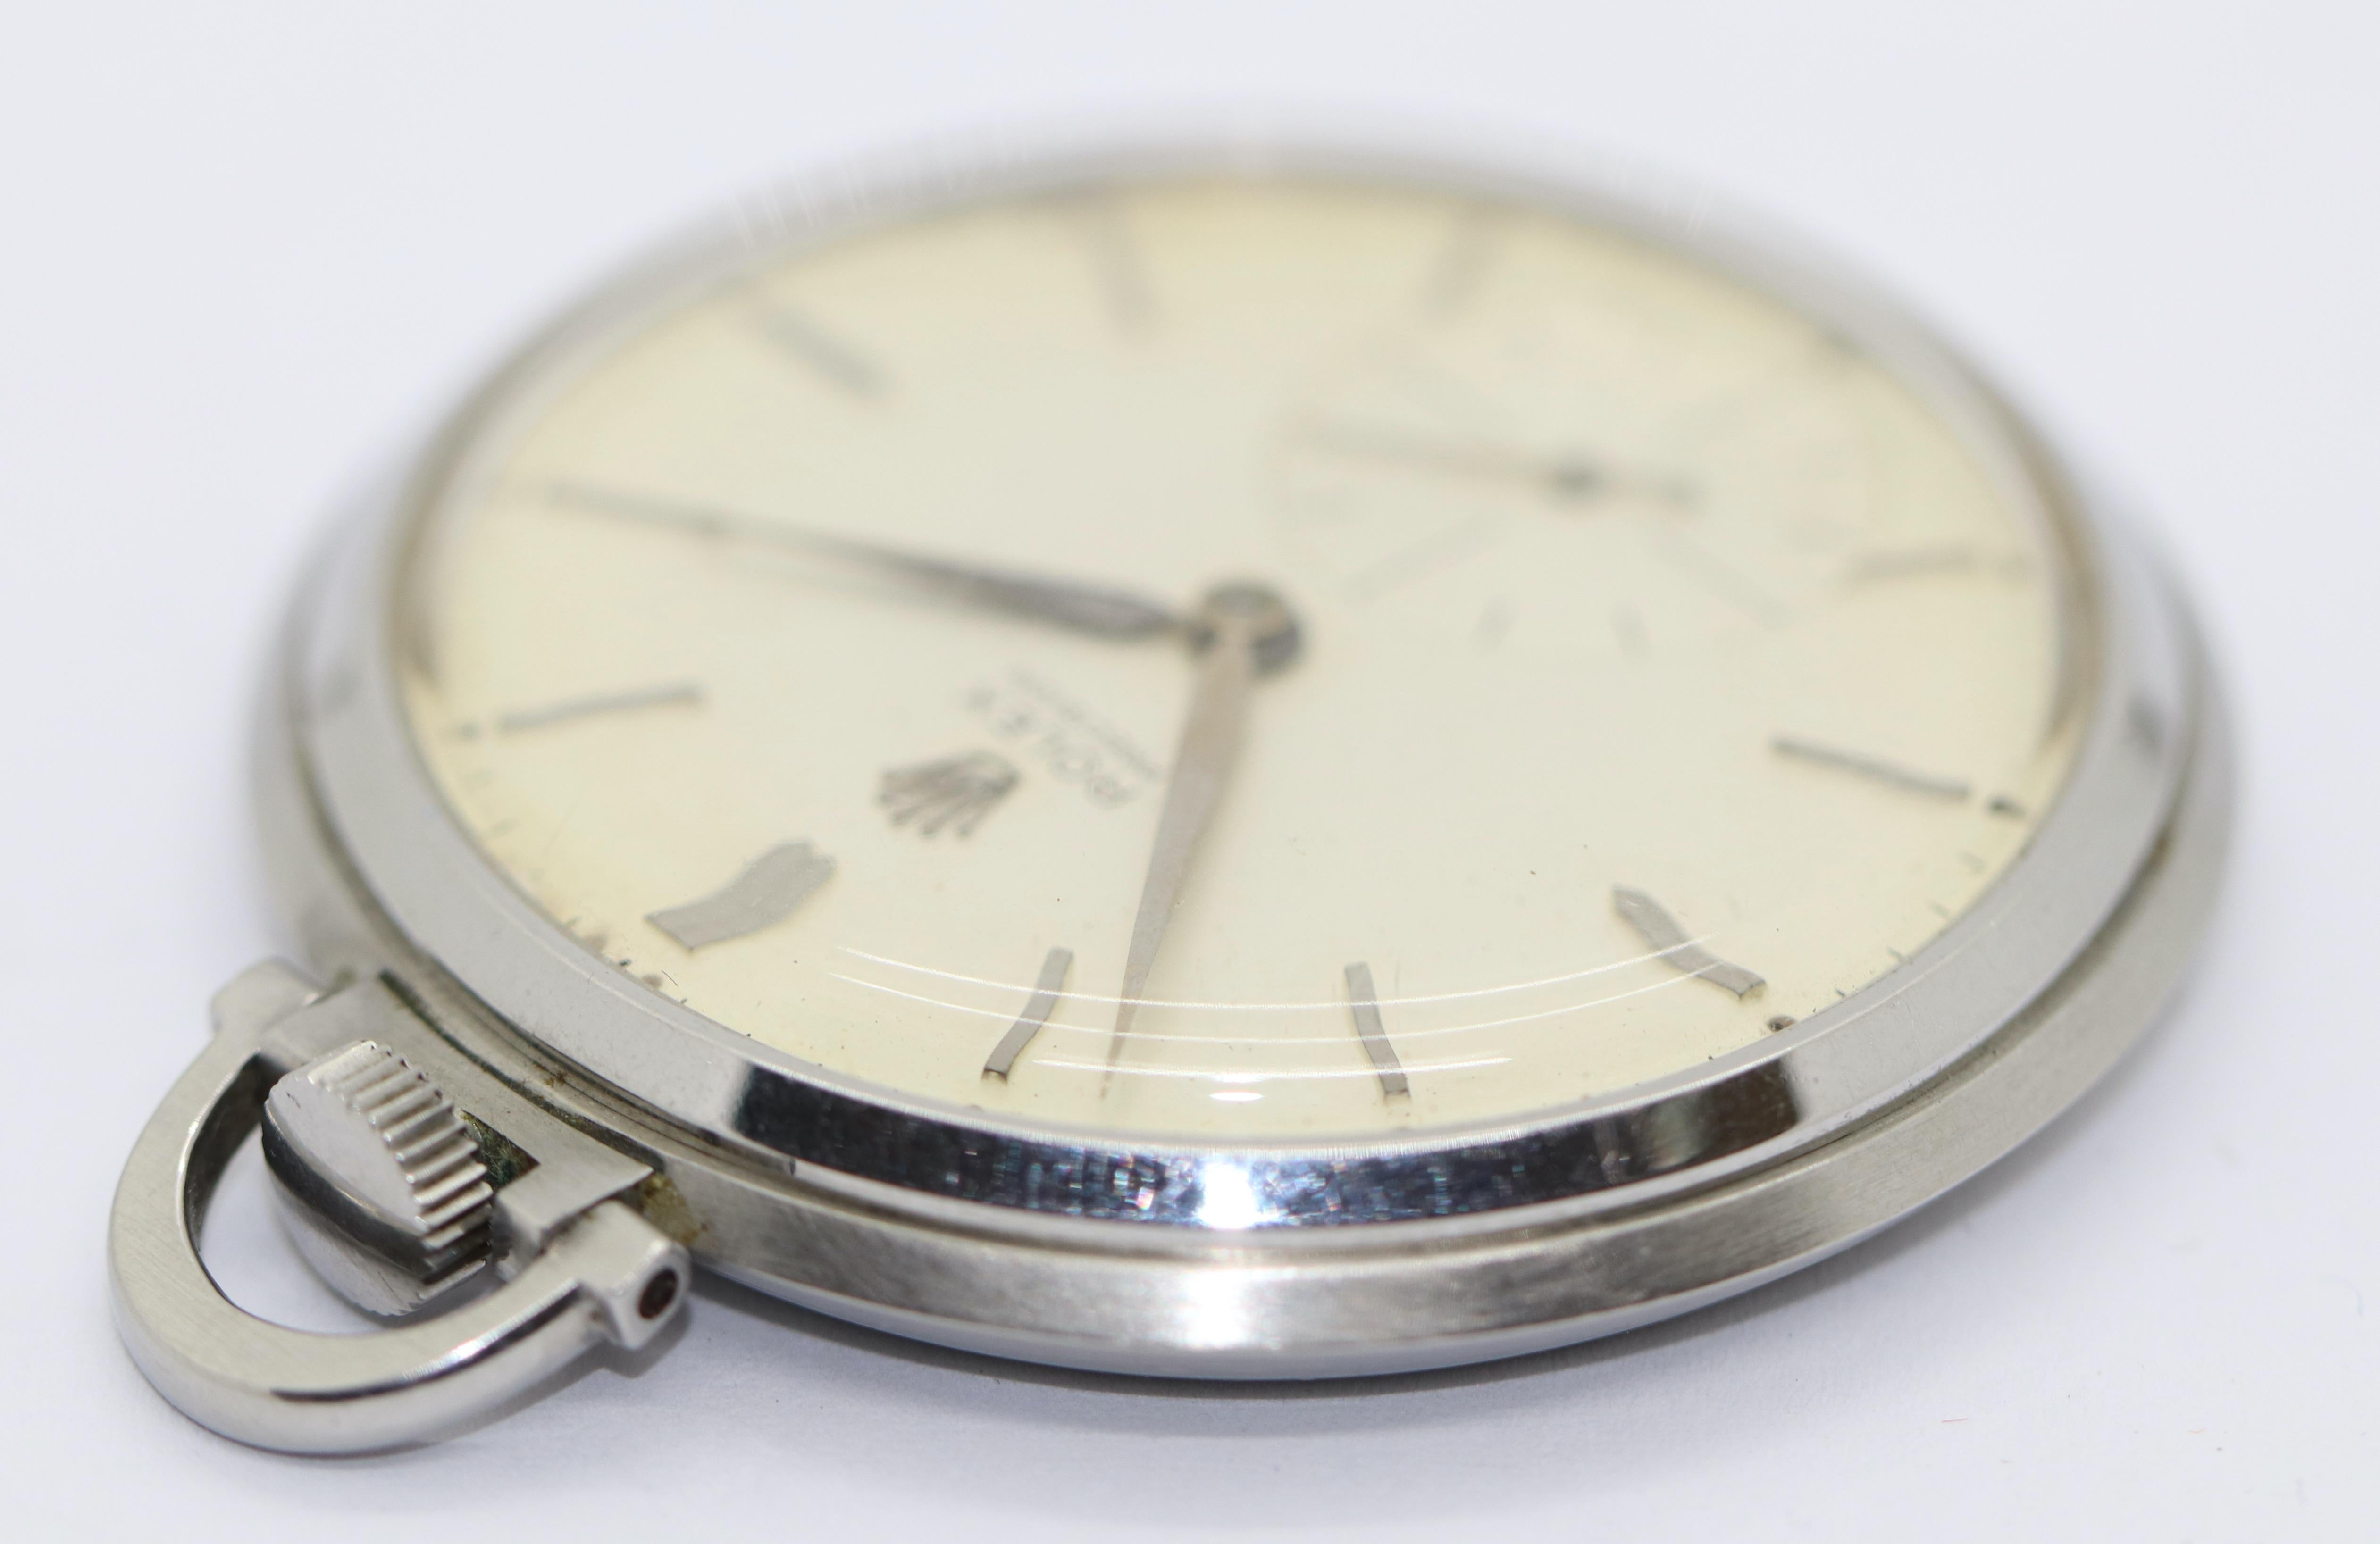 Rolex Precision Ref. 3400 Openface, Keyless Lever Pocket Watch, Stainless Steel For Sale 3